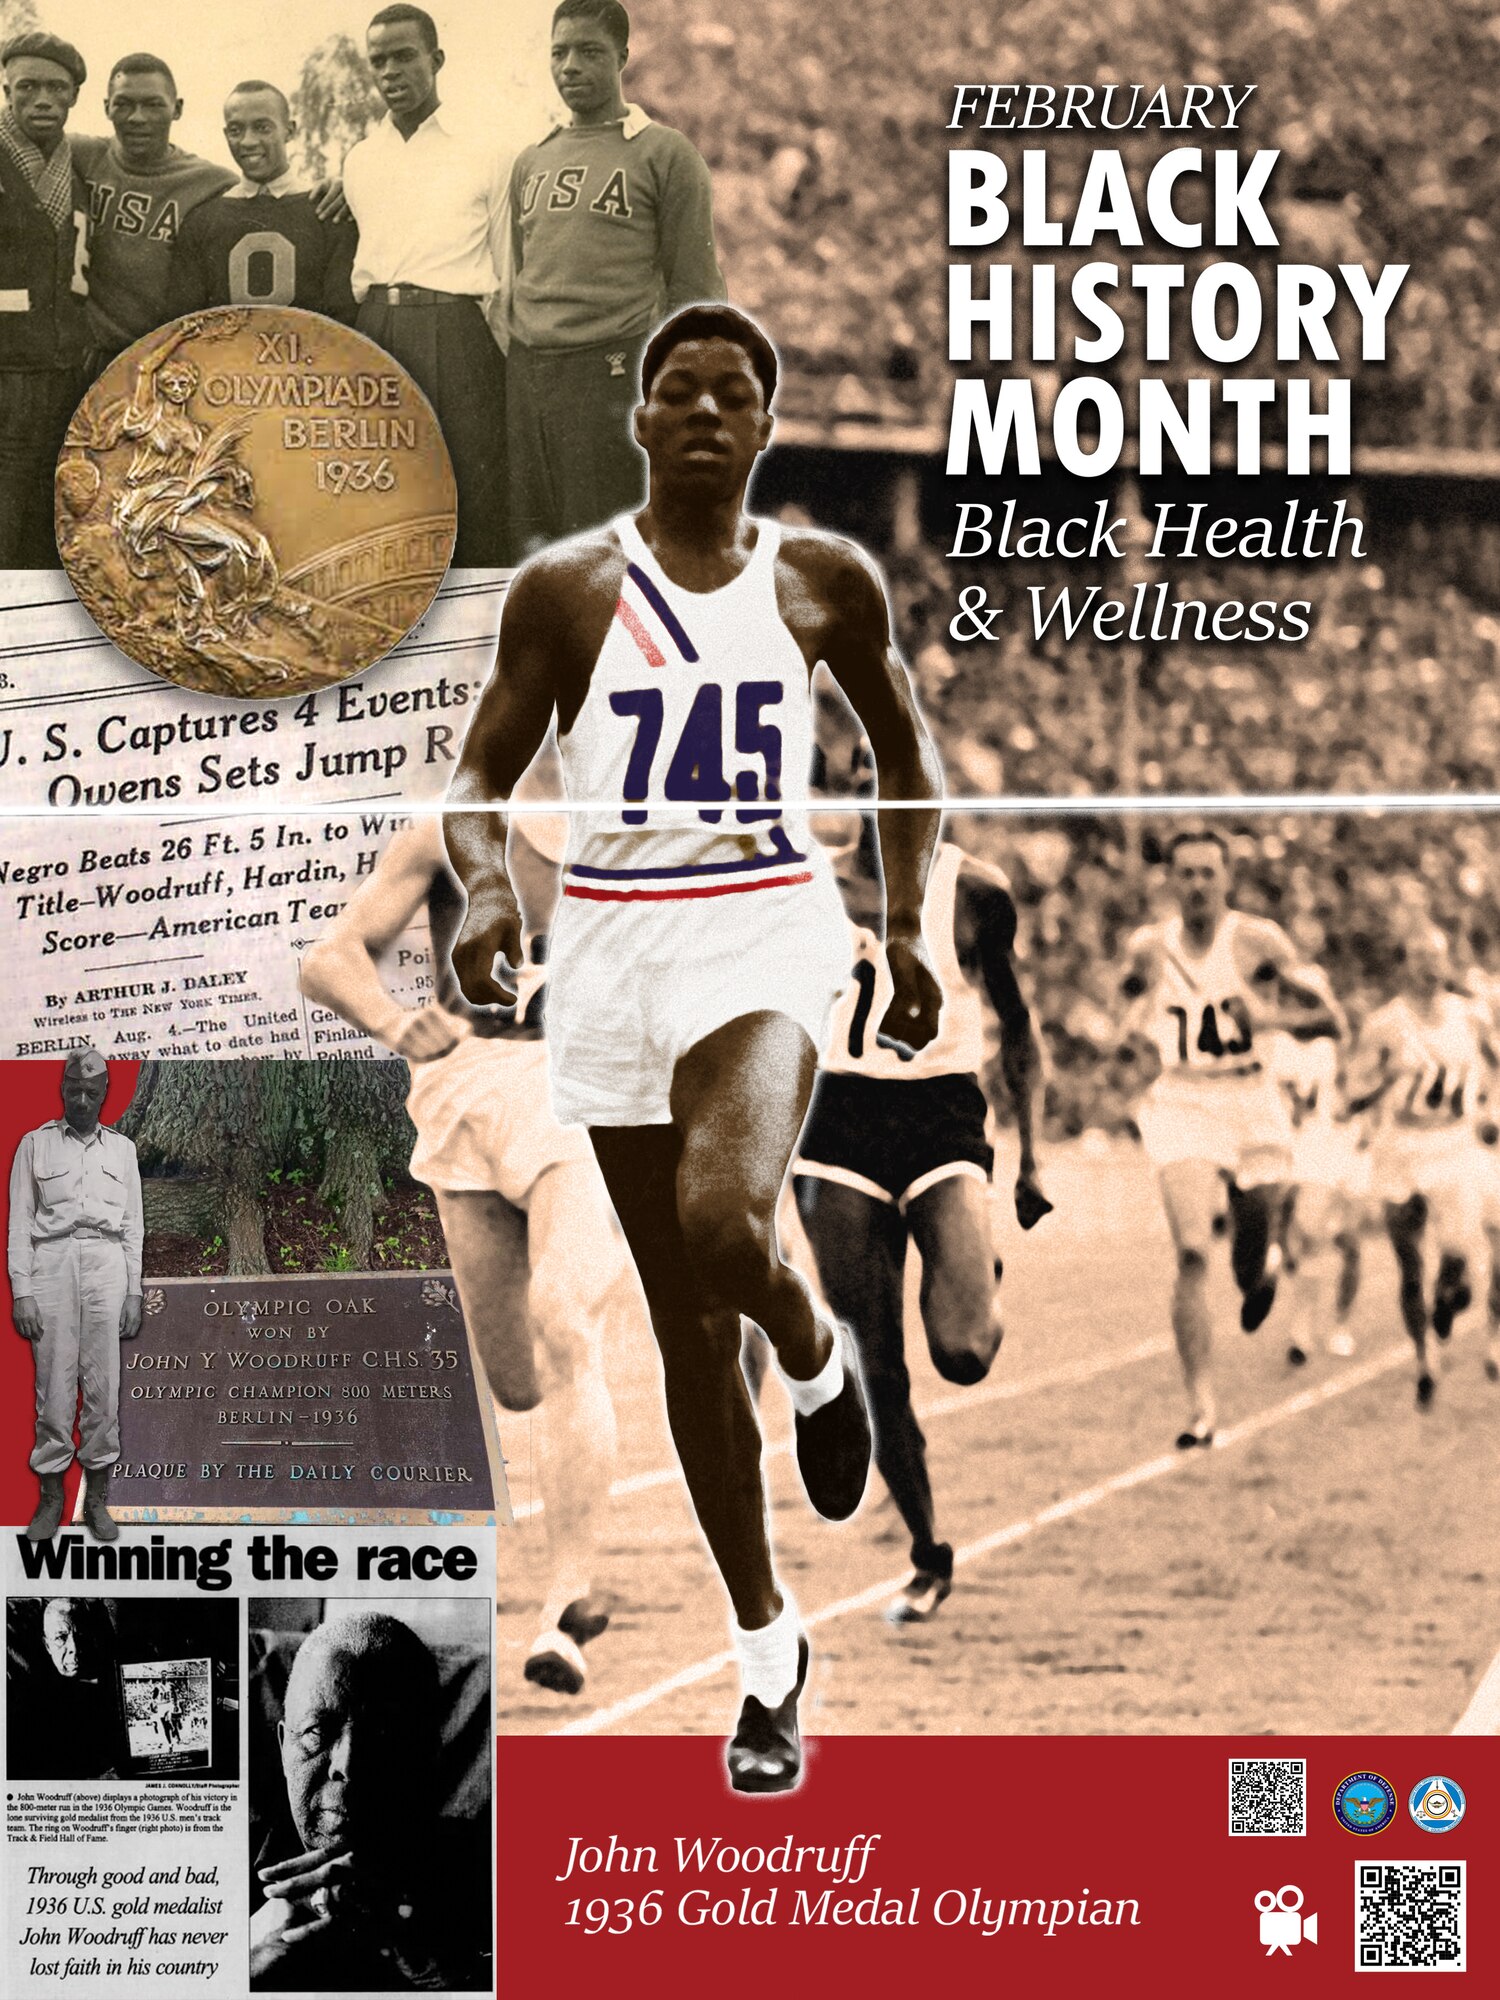 Department of Defense 2022 Black History Month Poster. The 2022 Black History Month poster is a collage of images and black and white photographs recognizing the achievements of John Woodruff, a 1936 Gold Medal Olympian at Berlin, Germany and later U.S. Army lieutenant colonel, who served in World War II and Korea. Scan the quick response code (QRC) to view the captivating 1936 Olympic race. (Graphic by the Defense Equal Opportunity Management Institute)